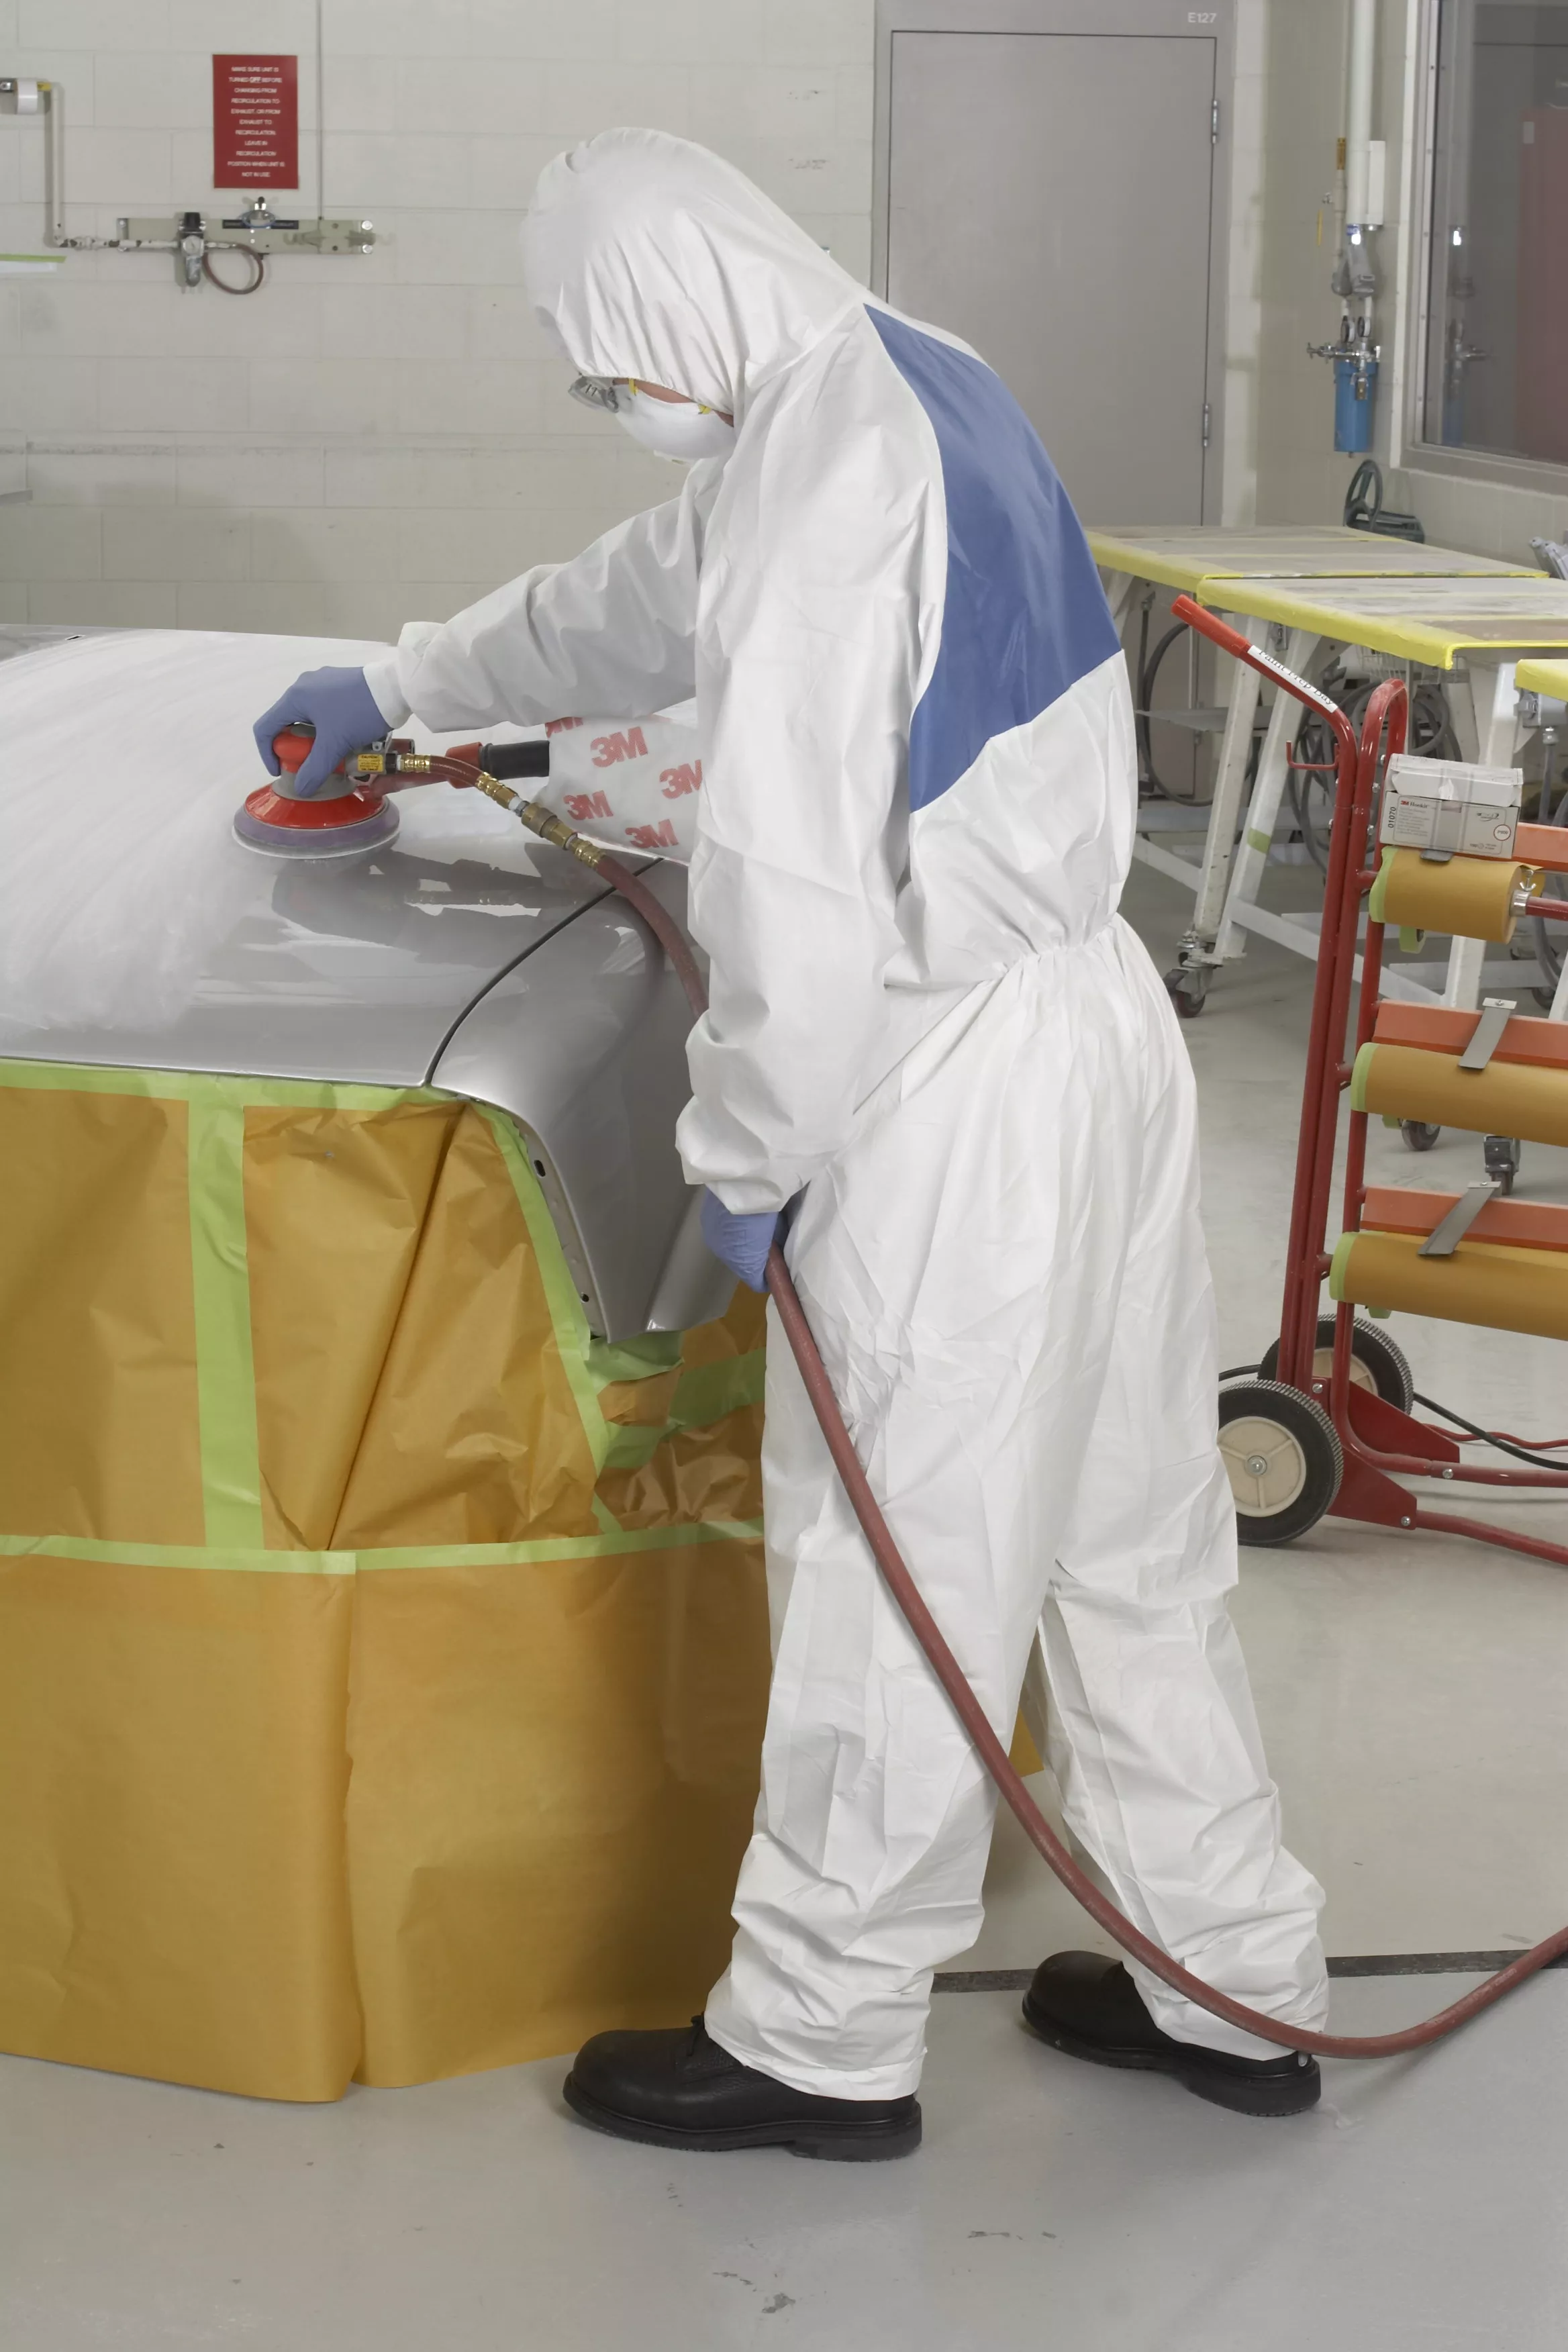 SKU 7100040416 | 3M™ Disposable Protective Coverall 4540+-L White/Blue MIV Type 5/6